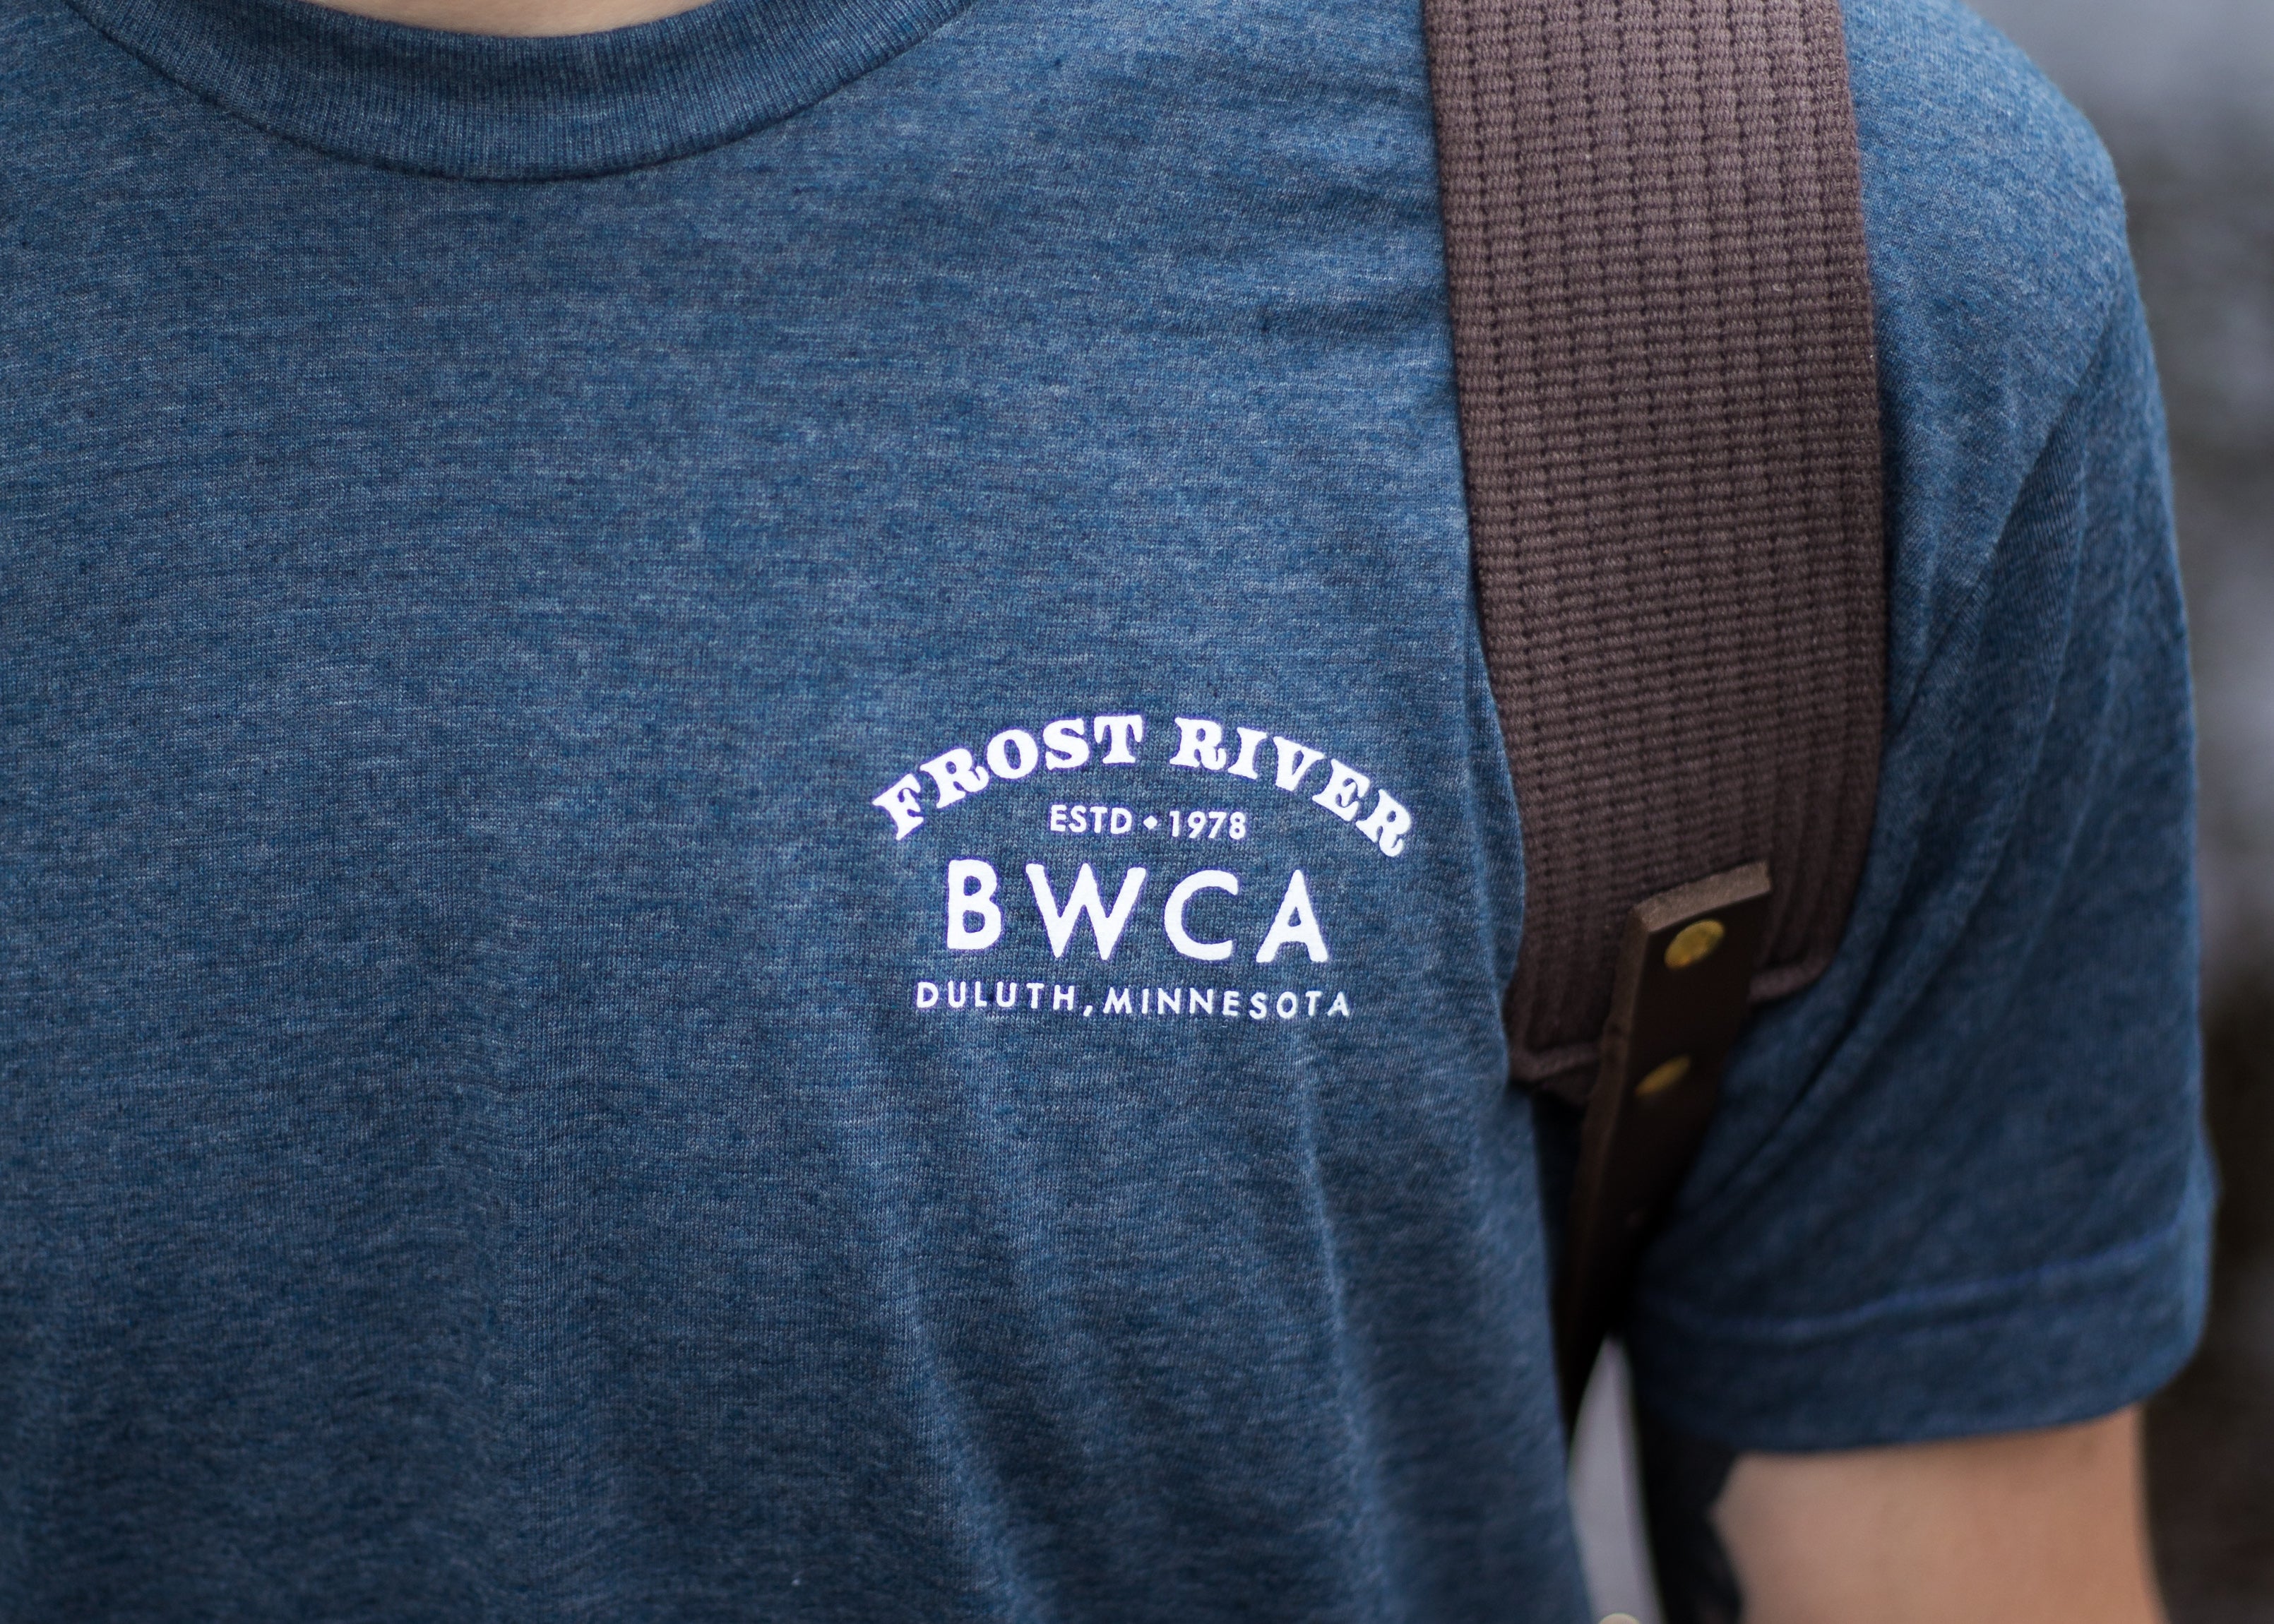 Frost River logo screen printed on the chest of a blue t-shirt.